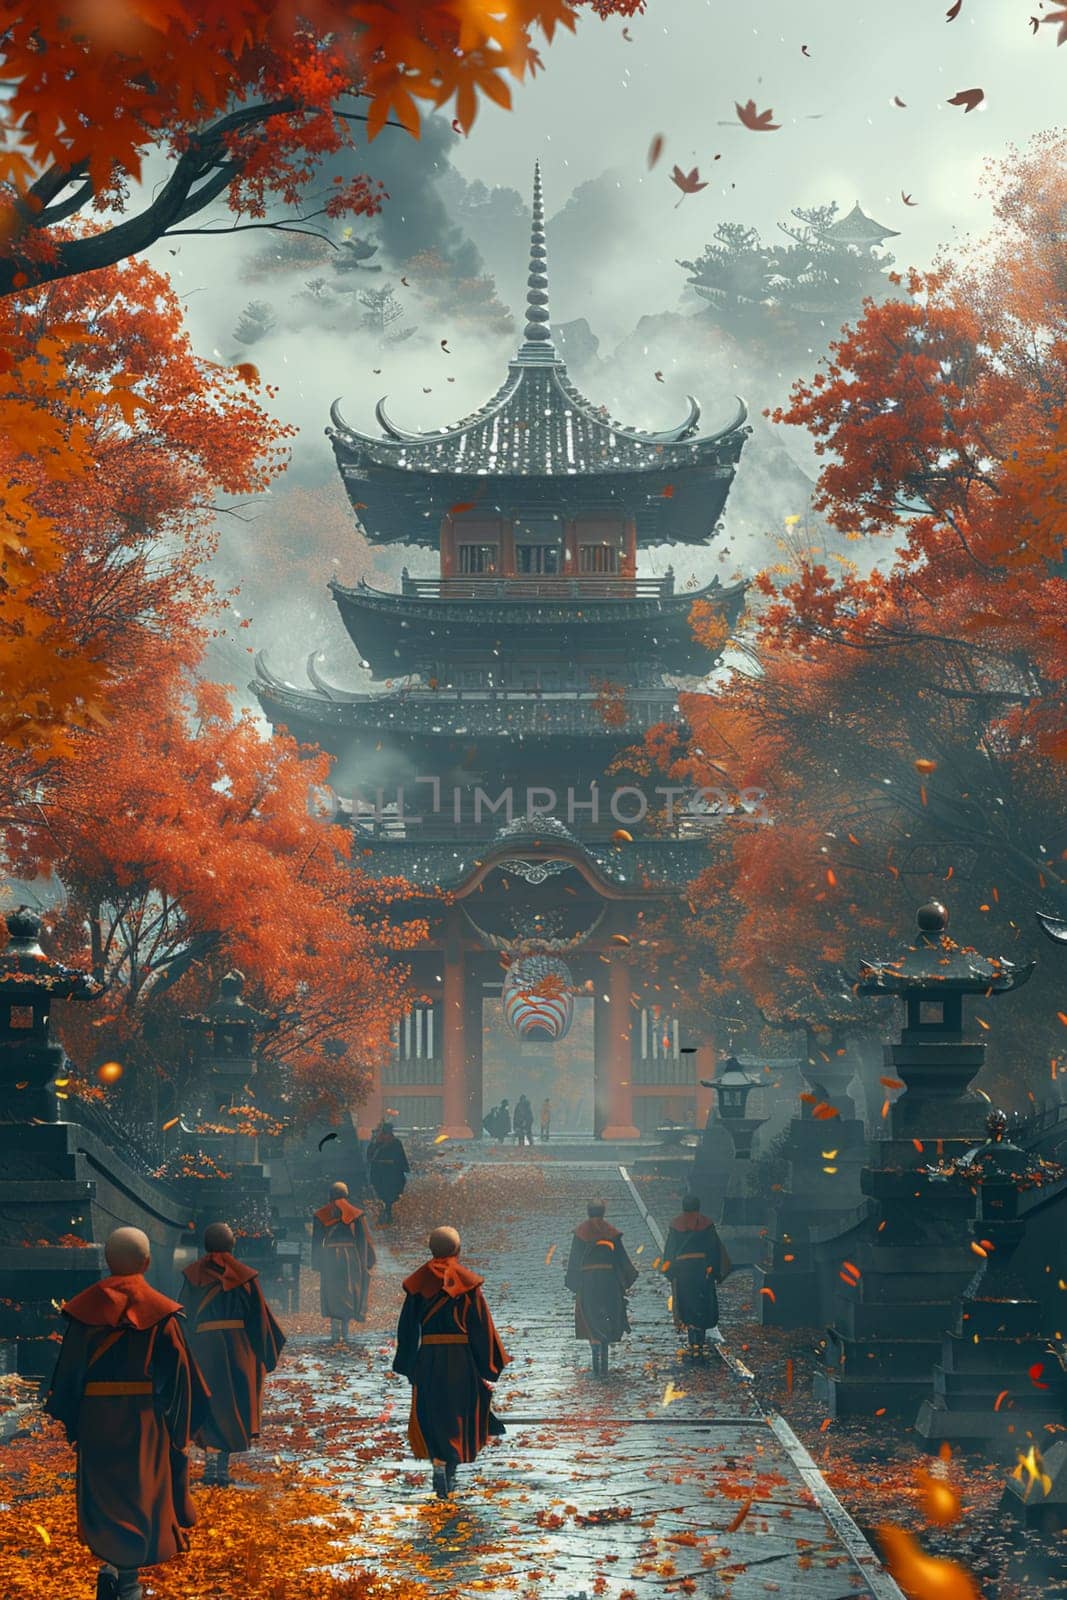 Digital art depicting a serene temple in autumn, with anime monks amidst falling leaves.